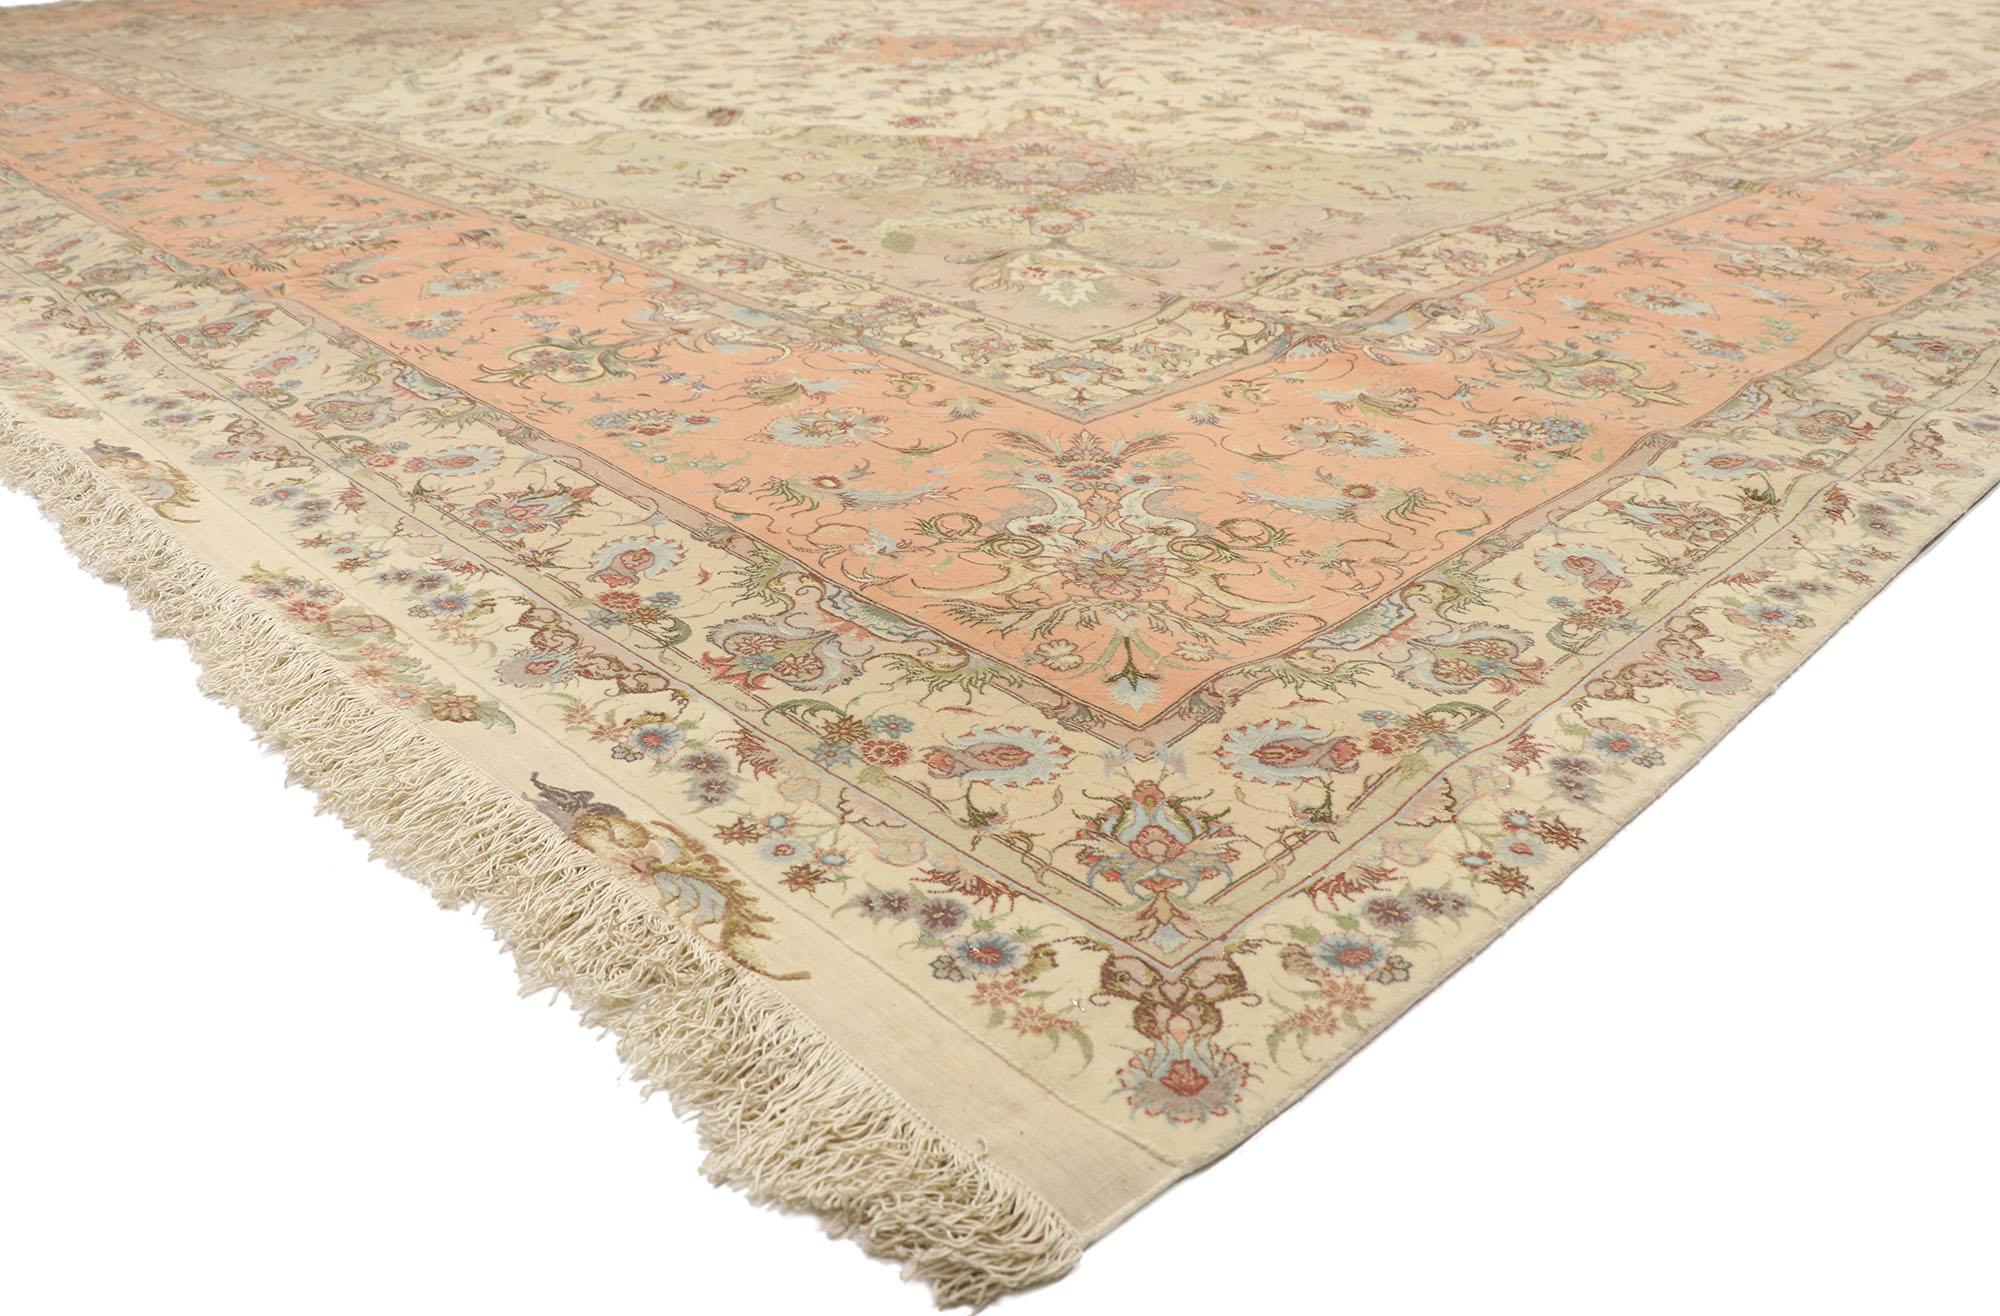 77438 Vintage Persian Tabriz Shirfar Rug, 16'04 x 25'11. Adorned with intricate embellishments and meticulously balanced symmetry, this vintage Persian Tabriz Shirfar rug, meticulously handcrafted from wool and silk, emanates the spirit of French